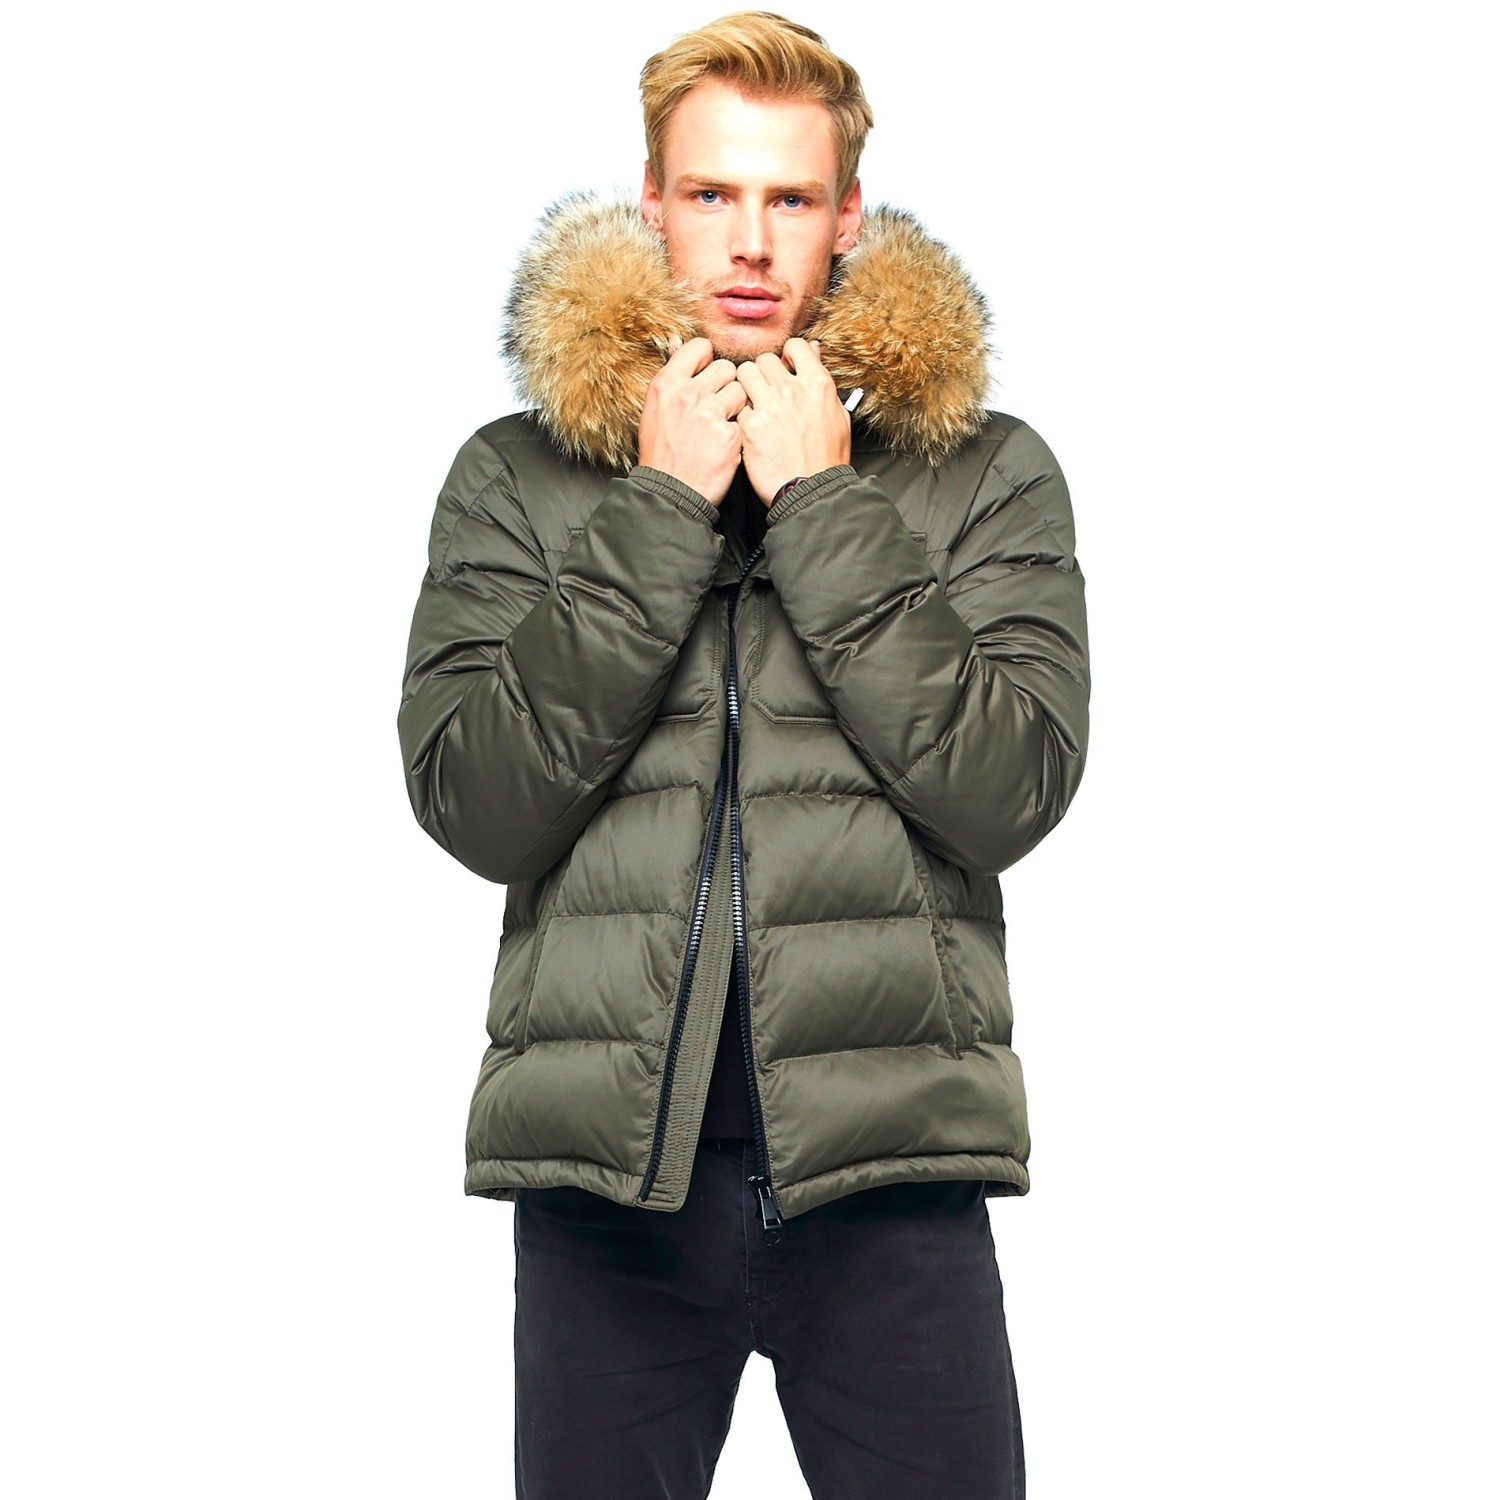 Lutratocro Mens Winter Faux Fur Hooded Thicken Fleece Quilted Parka Coat Outwear